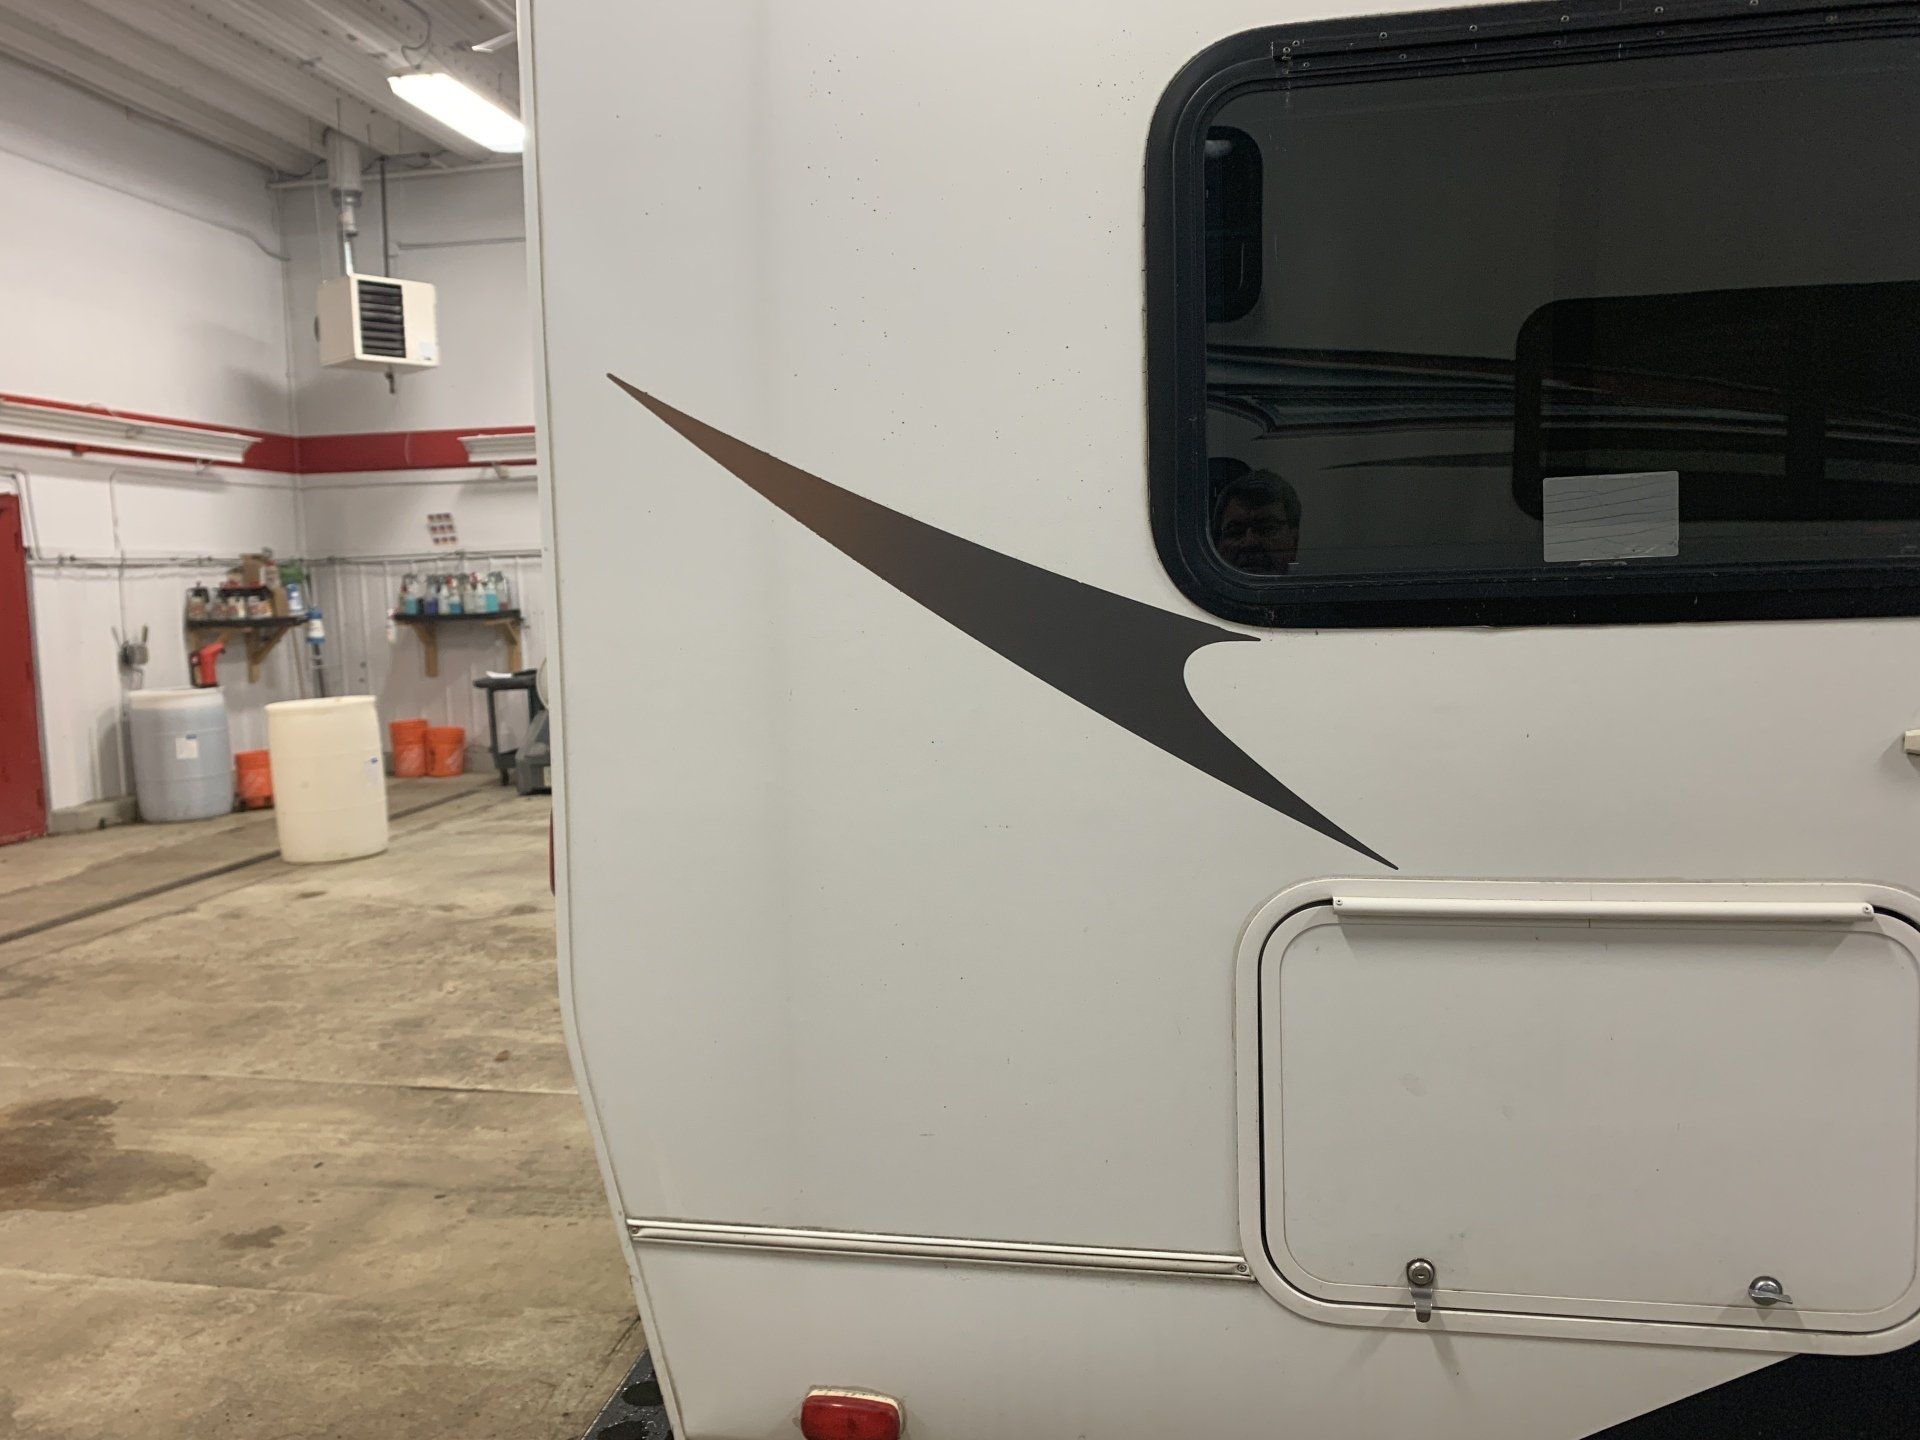 2020 - Alberta's Worst RV Decal Contest - Grand Prize Winner - Before & After - Pic 12